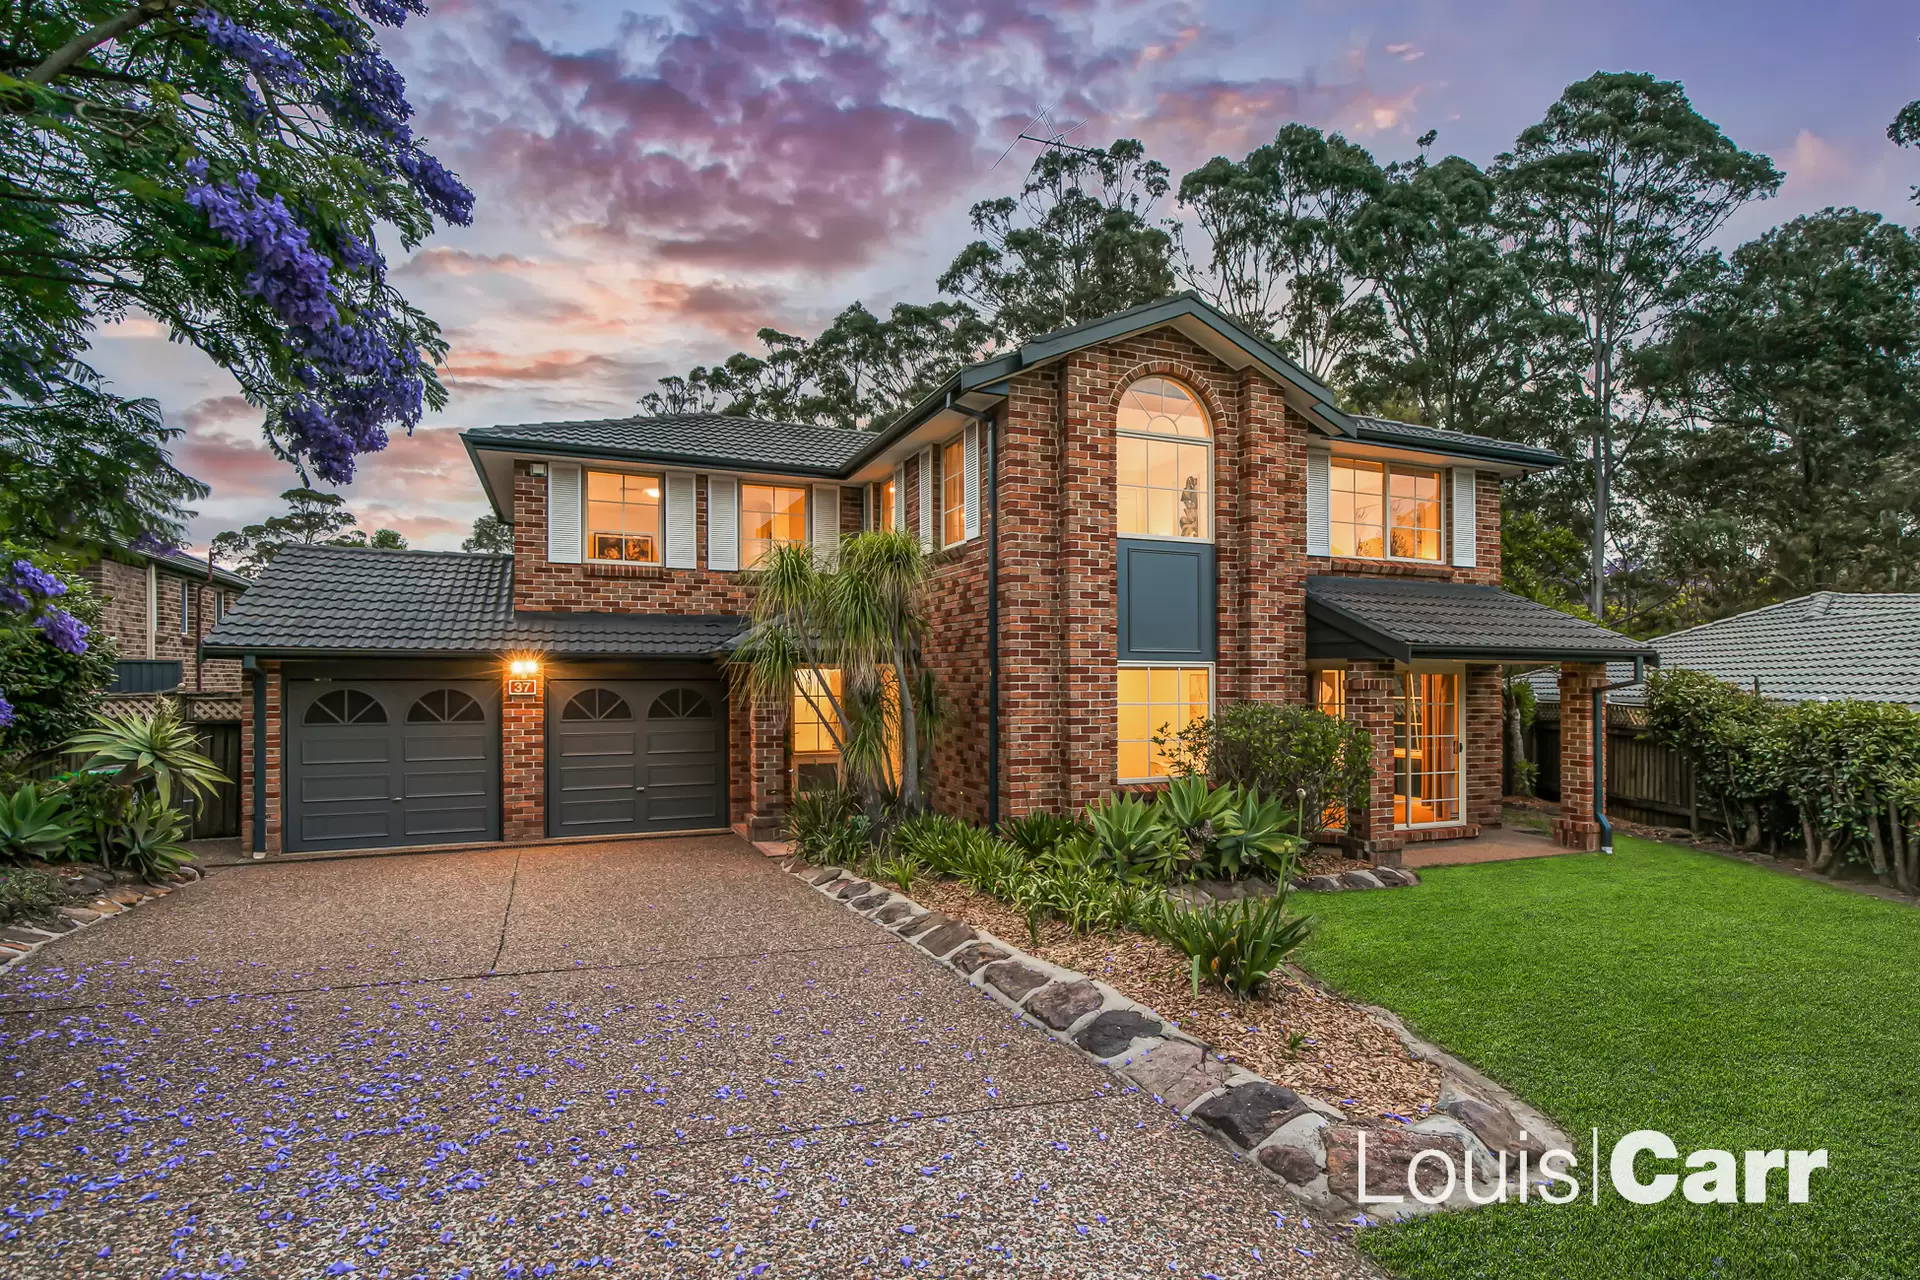 Photo #1: 37 Darlington Drive, Cherrybrook - Sold by Louis Carr Real Estate